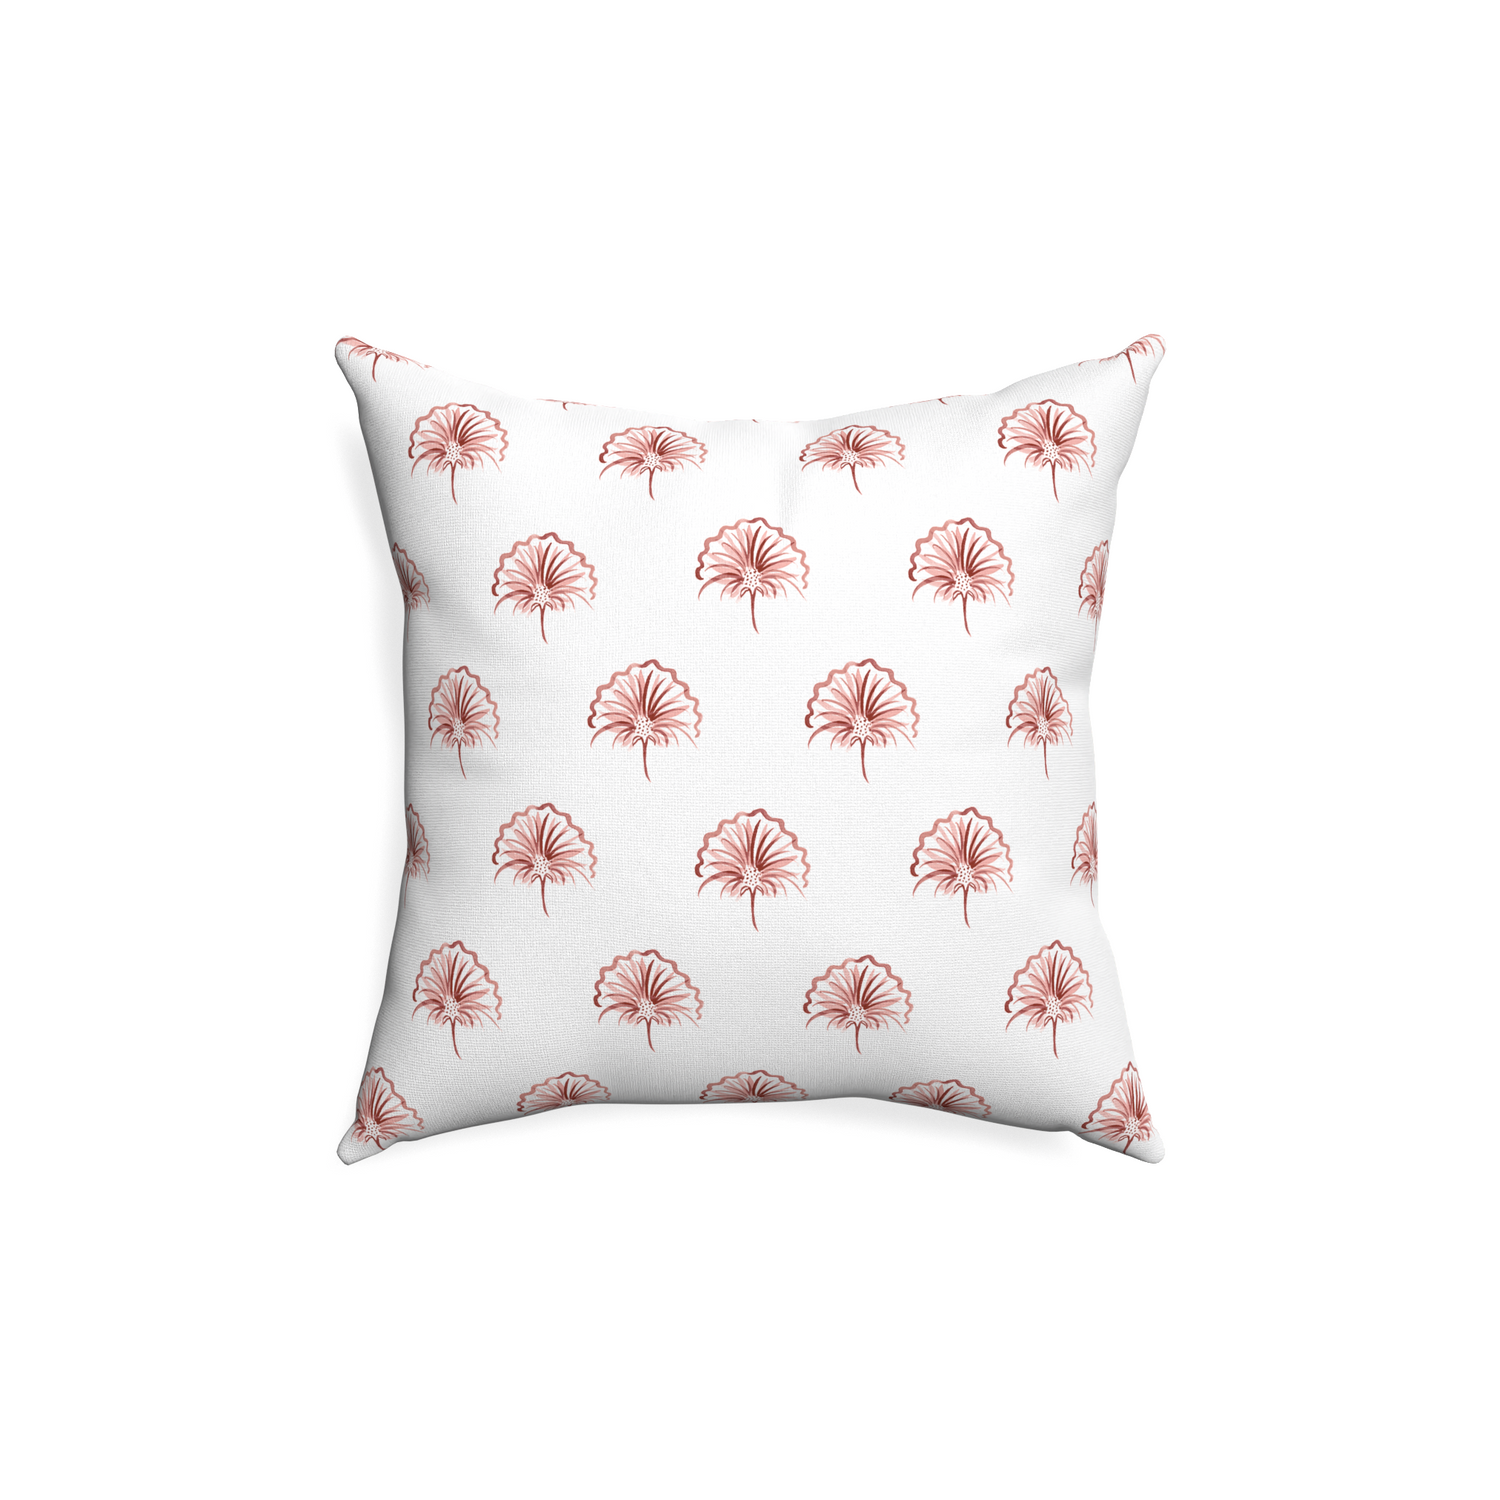 18-square penelope rose custom floral pinkpillow with none on white background